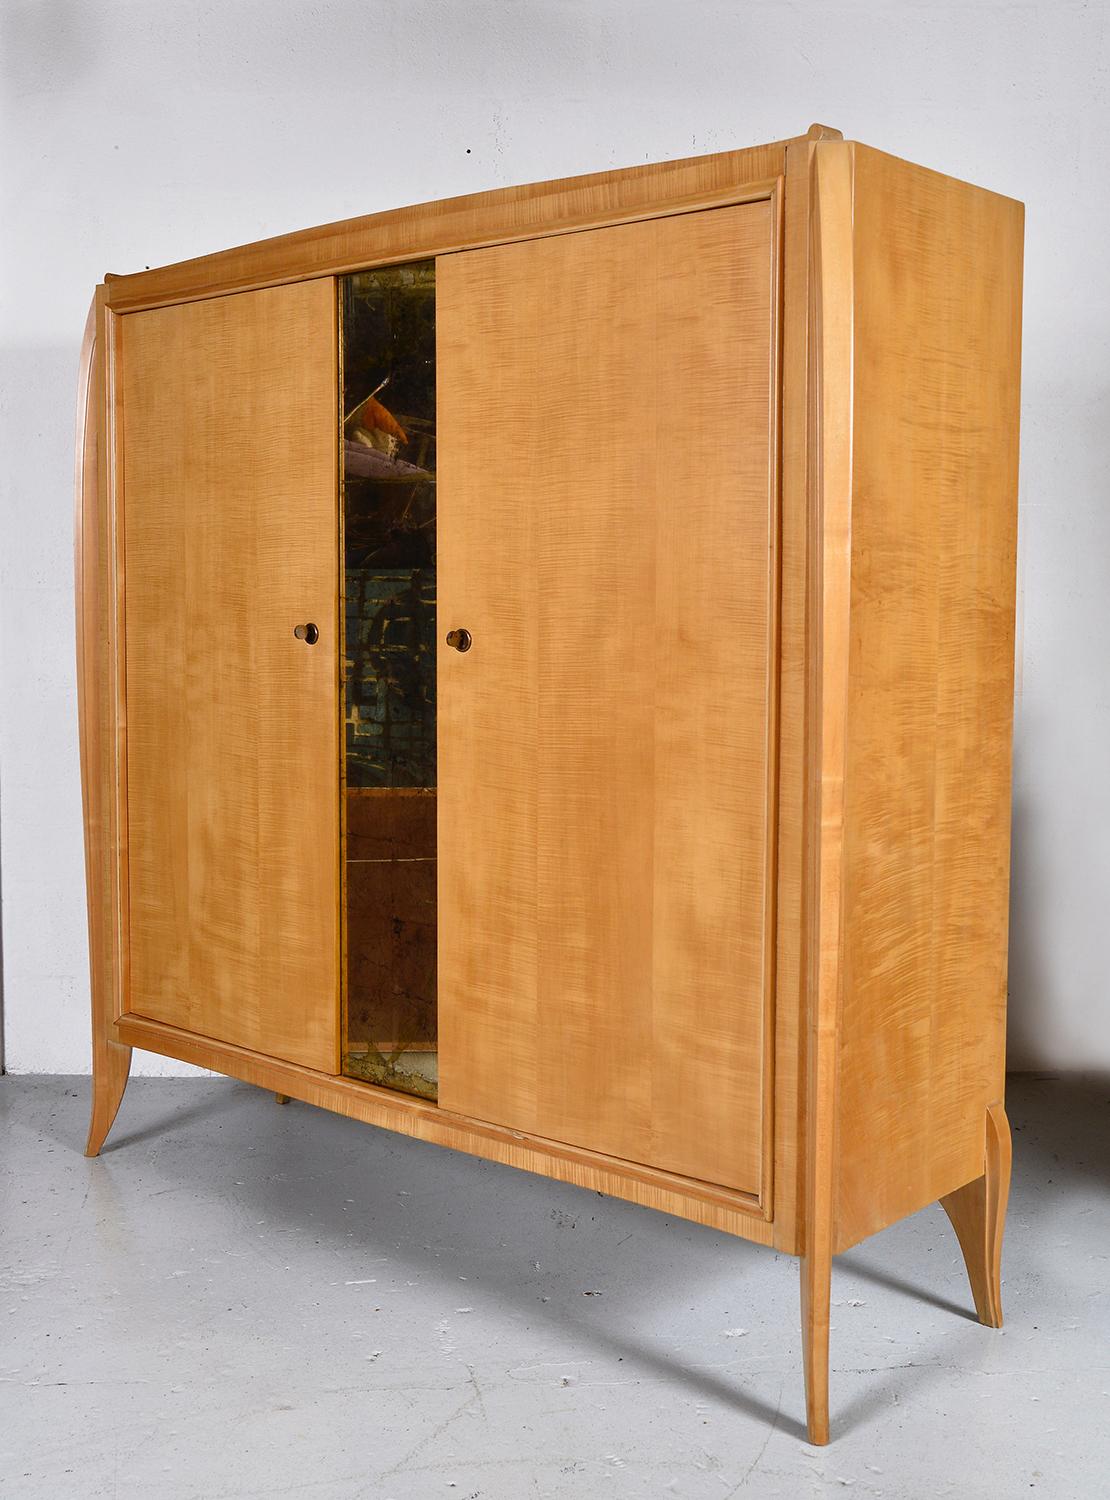 French Editions AV Burr Maple Wardrobe with Mirror Panel, 1940's For Sale 6